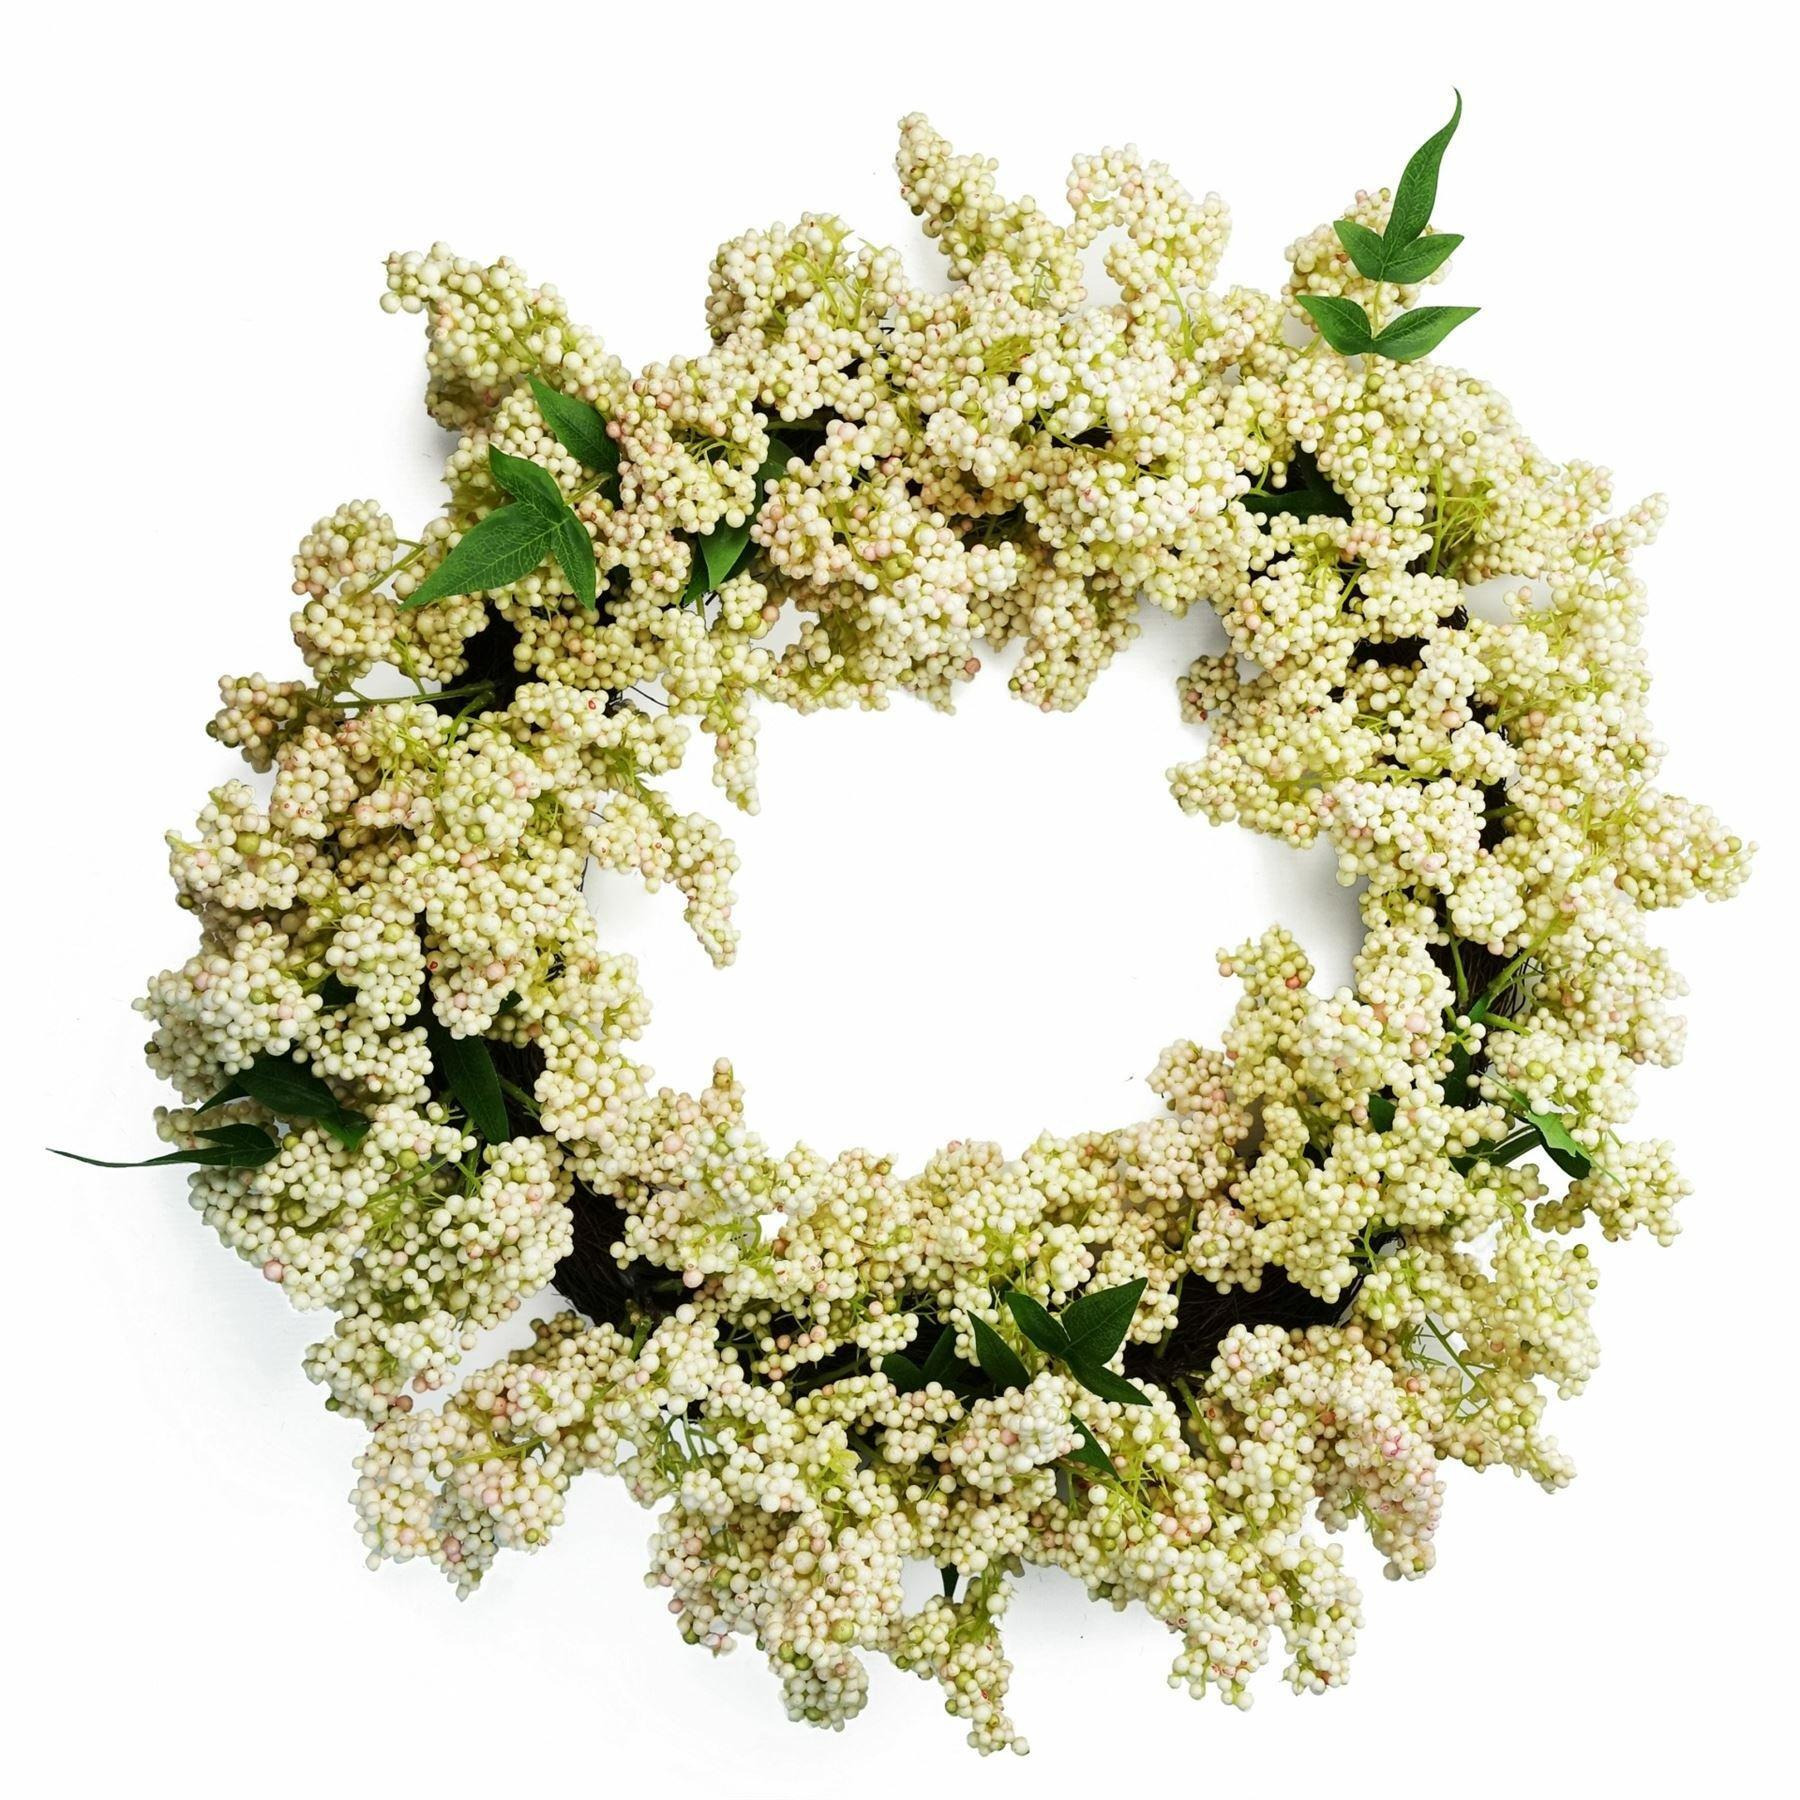 55cm Artificial Hanging White Berries Wreath - image 1